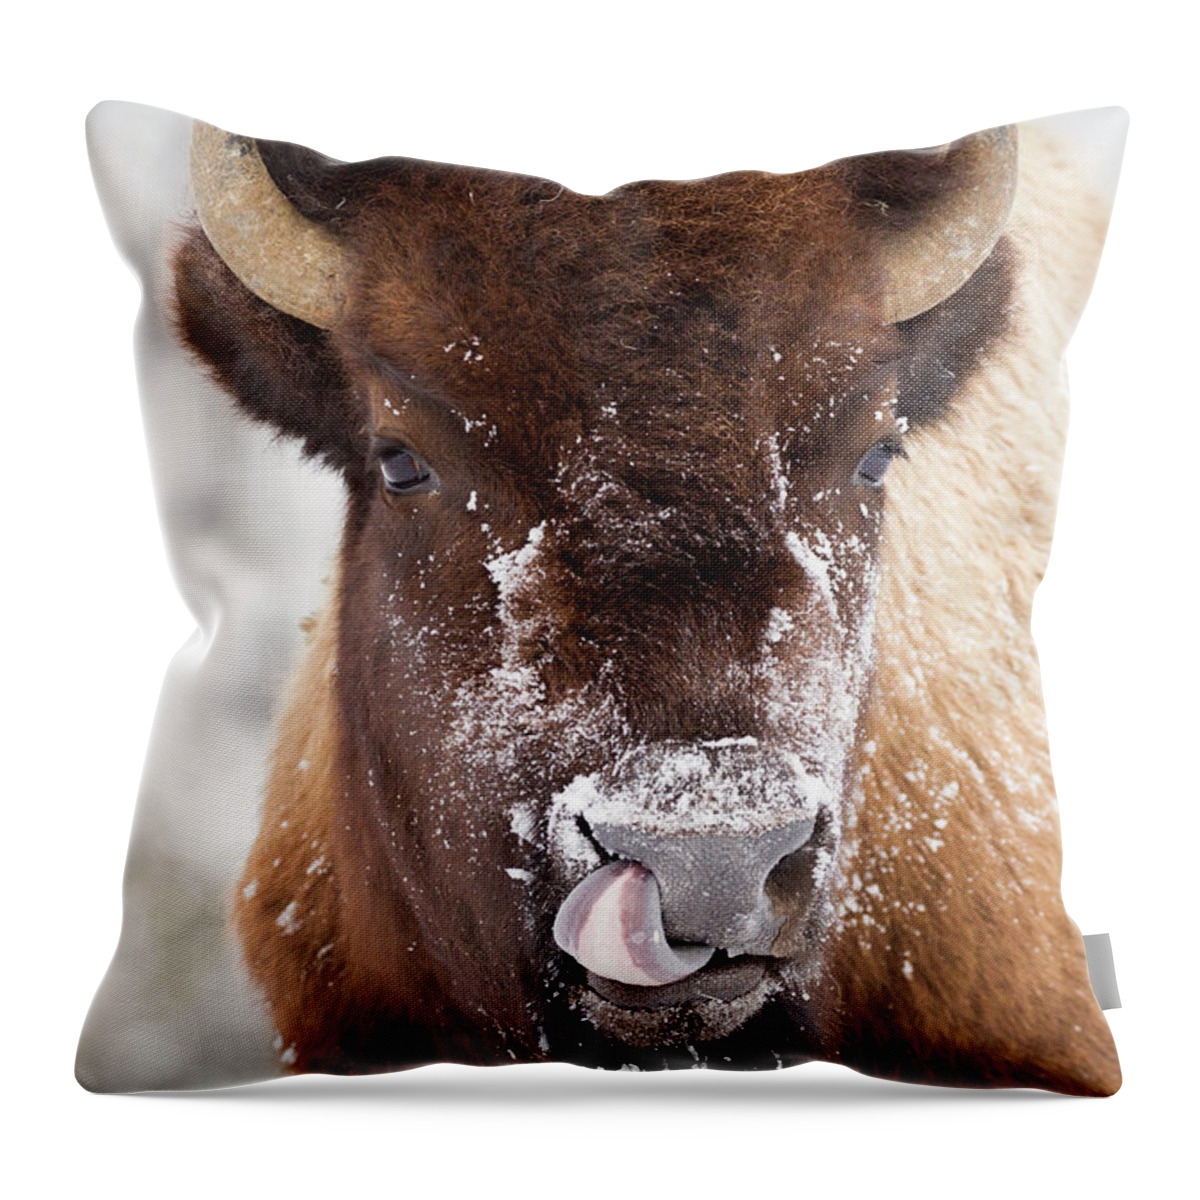 Sebastian Kennerknecht Throw Pillow featuring the photograph American Bison Licking Nose by Sebastian Kennerknecht